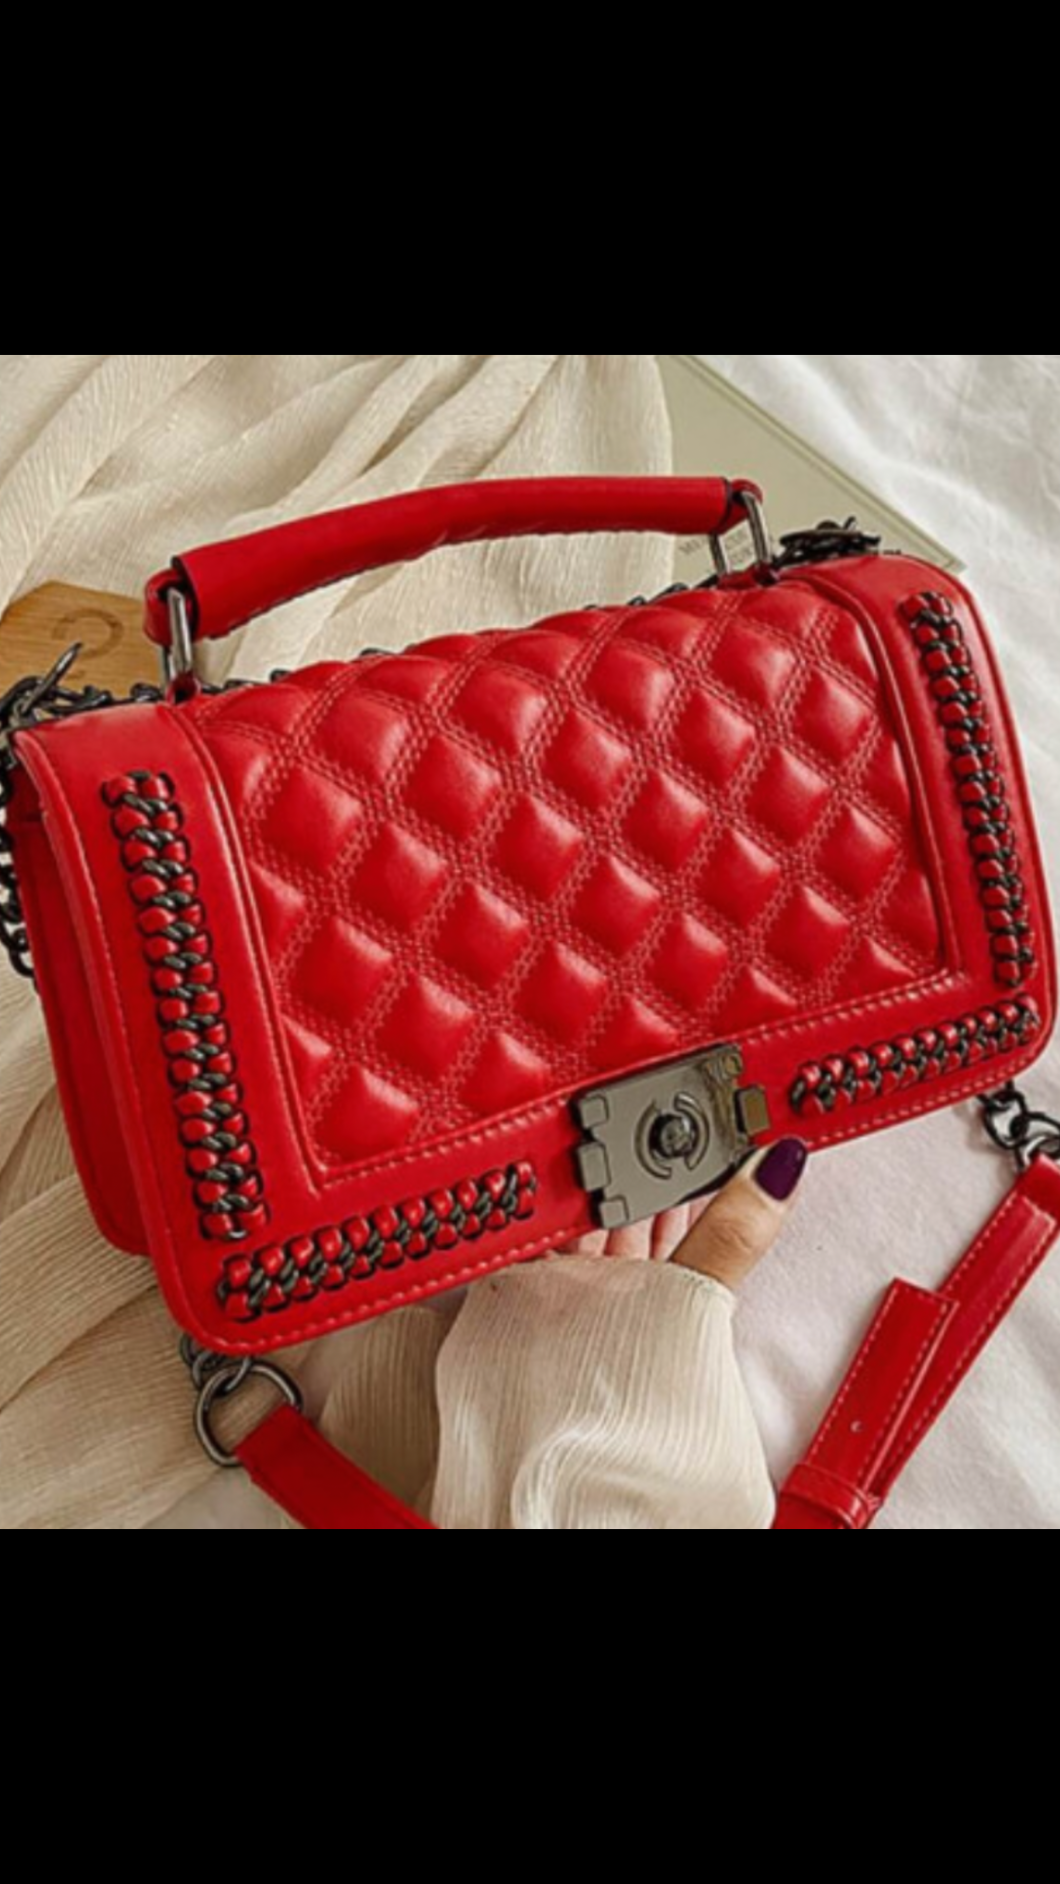 Crimson Kiss Leather Quilted Chain Purse